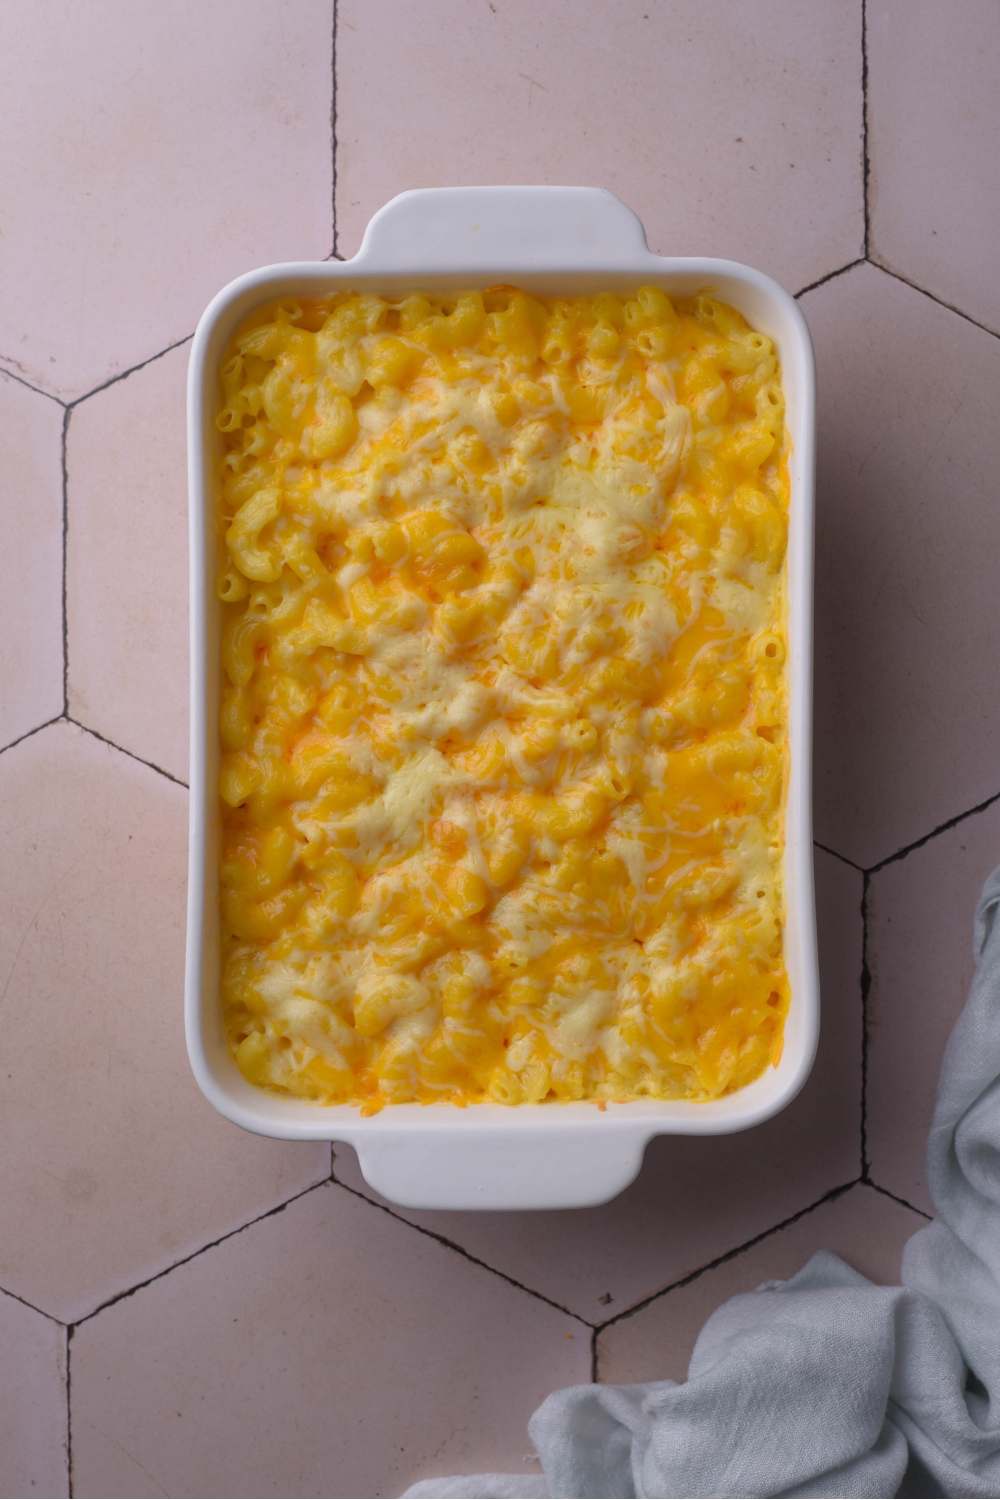 A white baking dish filled with freshly baked Chick Fil A mac and cheese with melted cheese on top.